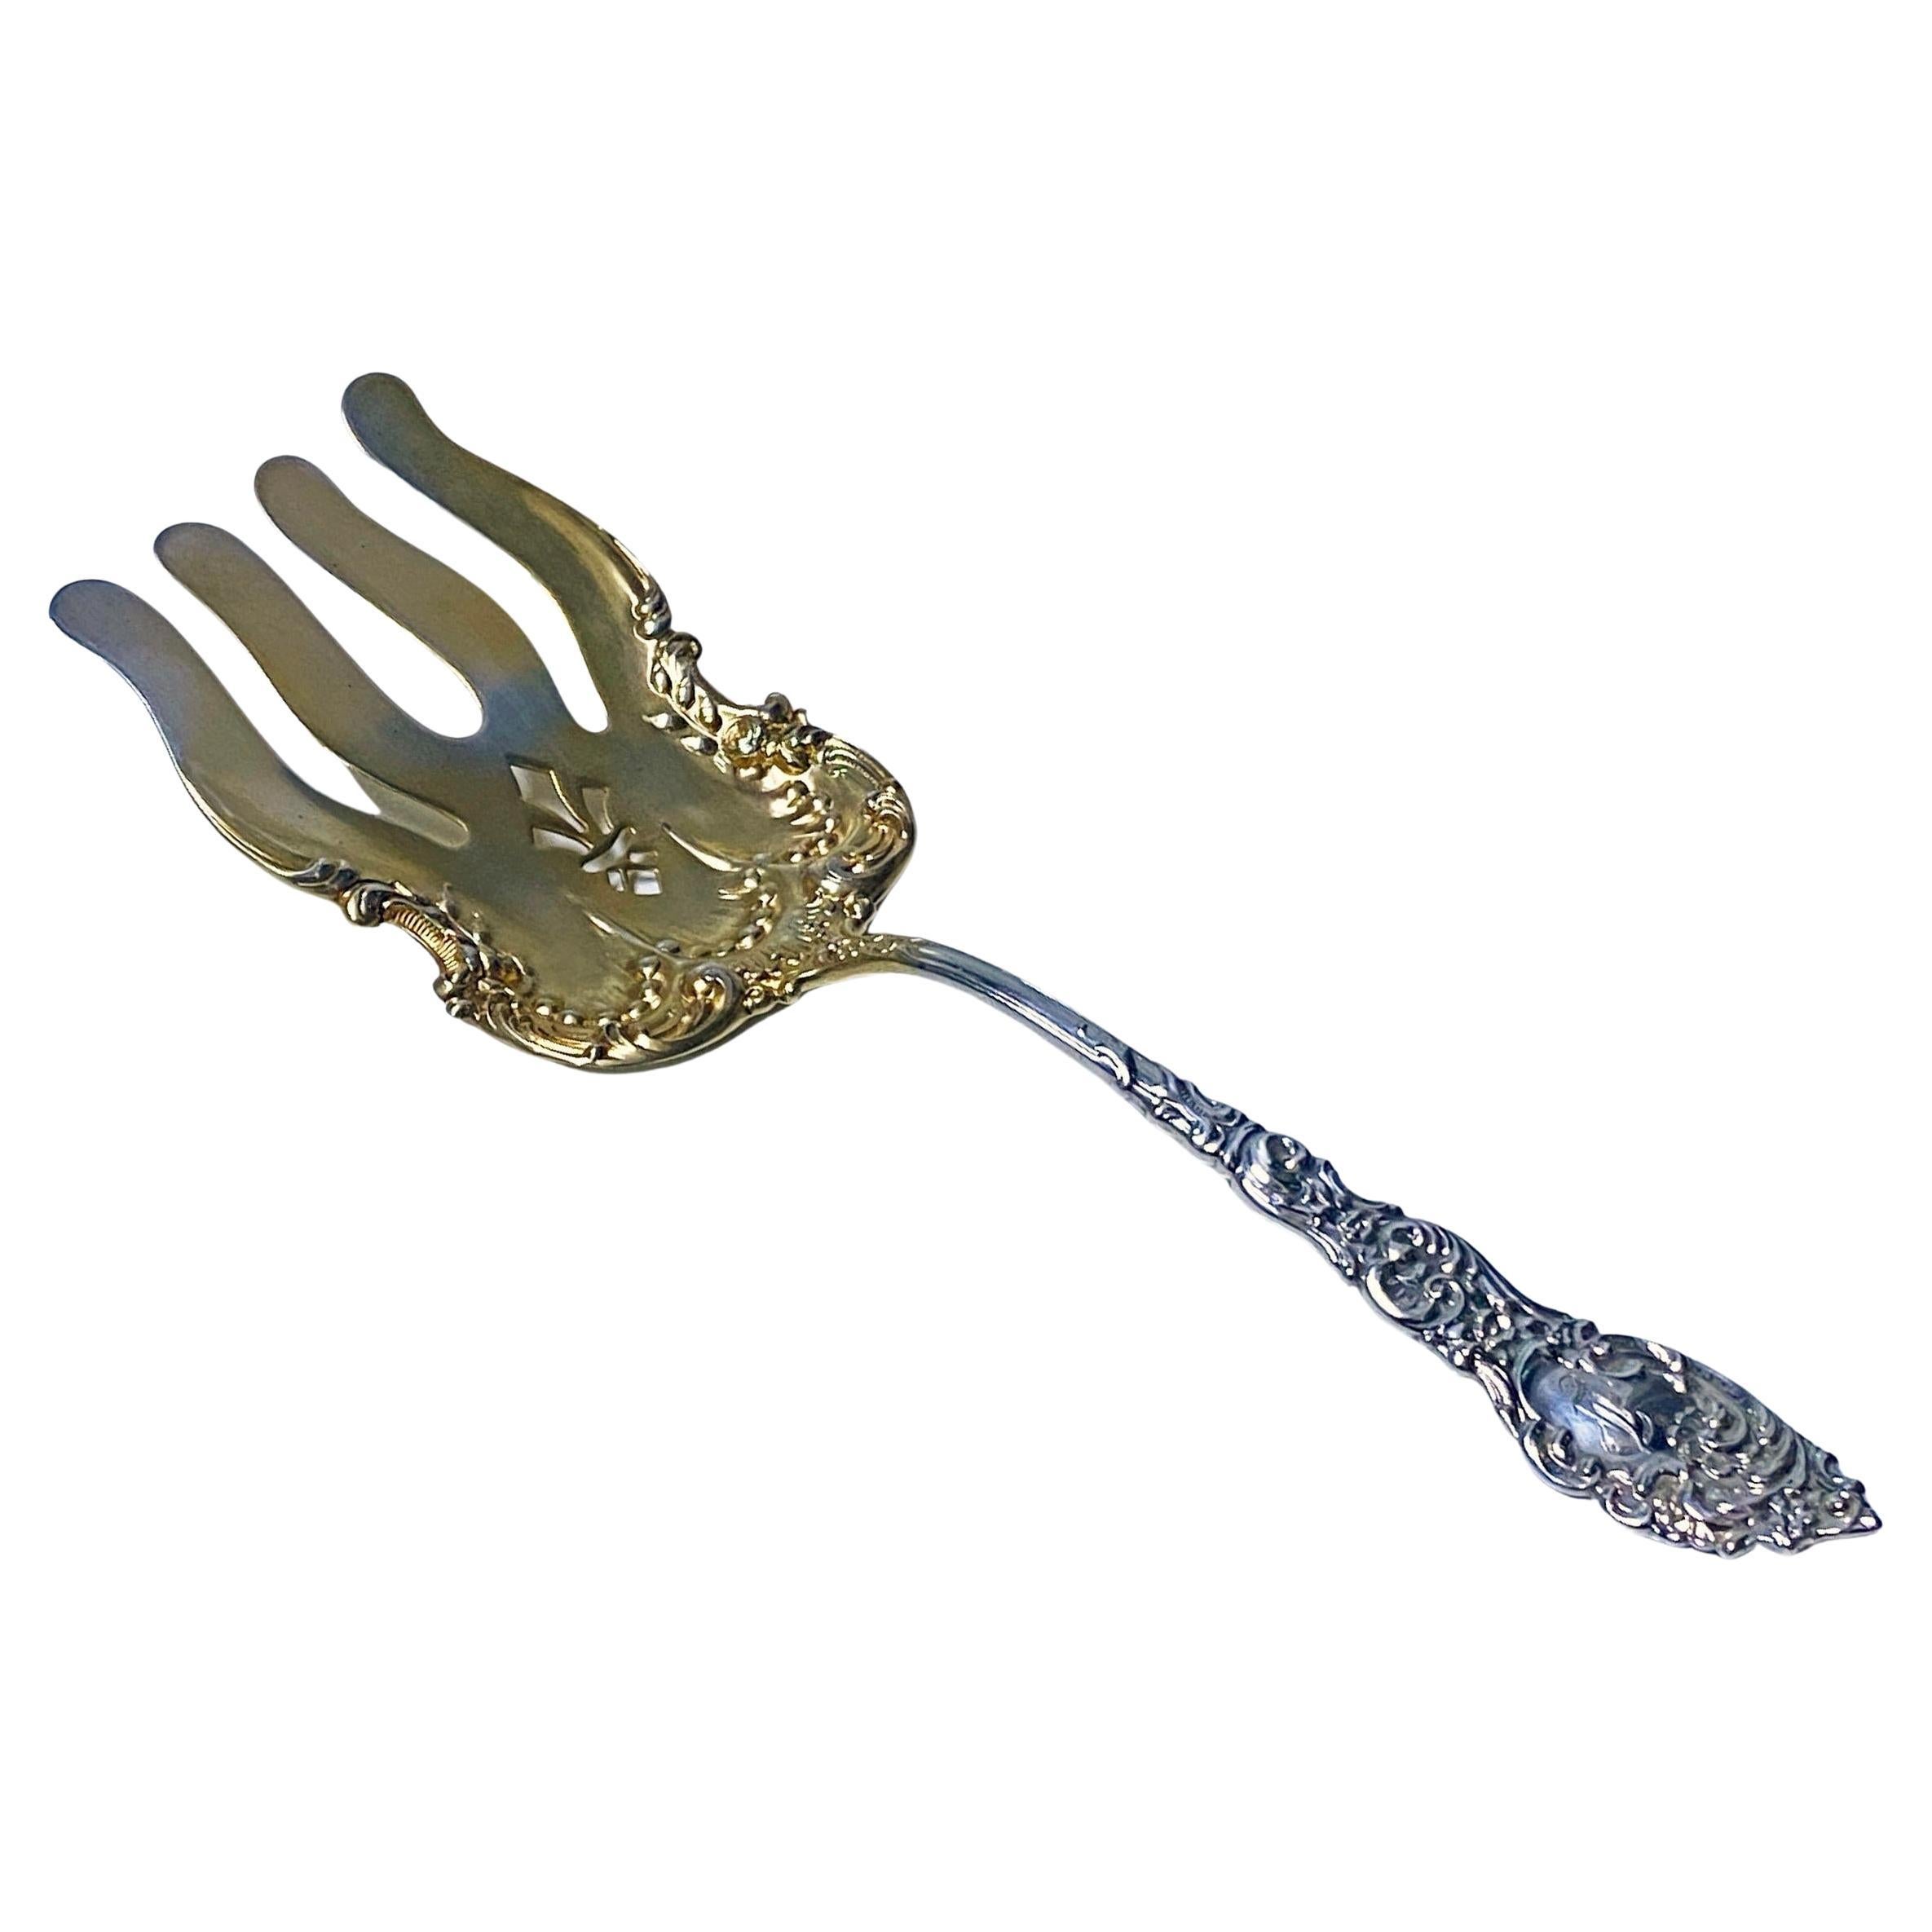 Passaic by Unger Sterling Silver Asparagus Fork, circa 1900